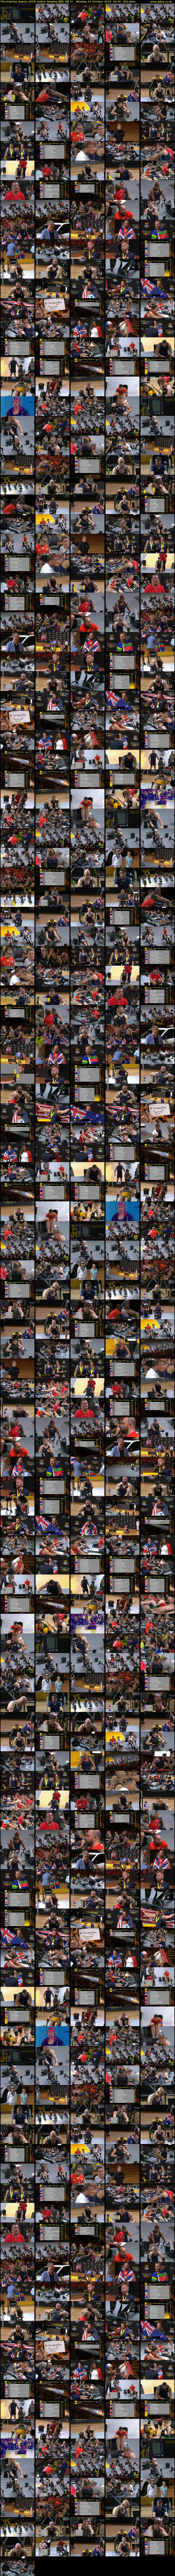 The Invictus Games 2018: Indoor Rowing (BBC RB 1) Monday 22 October 2018 20:00 - 02:00